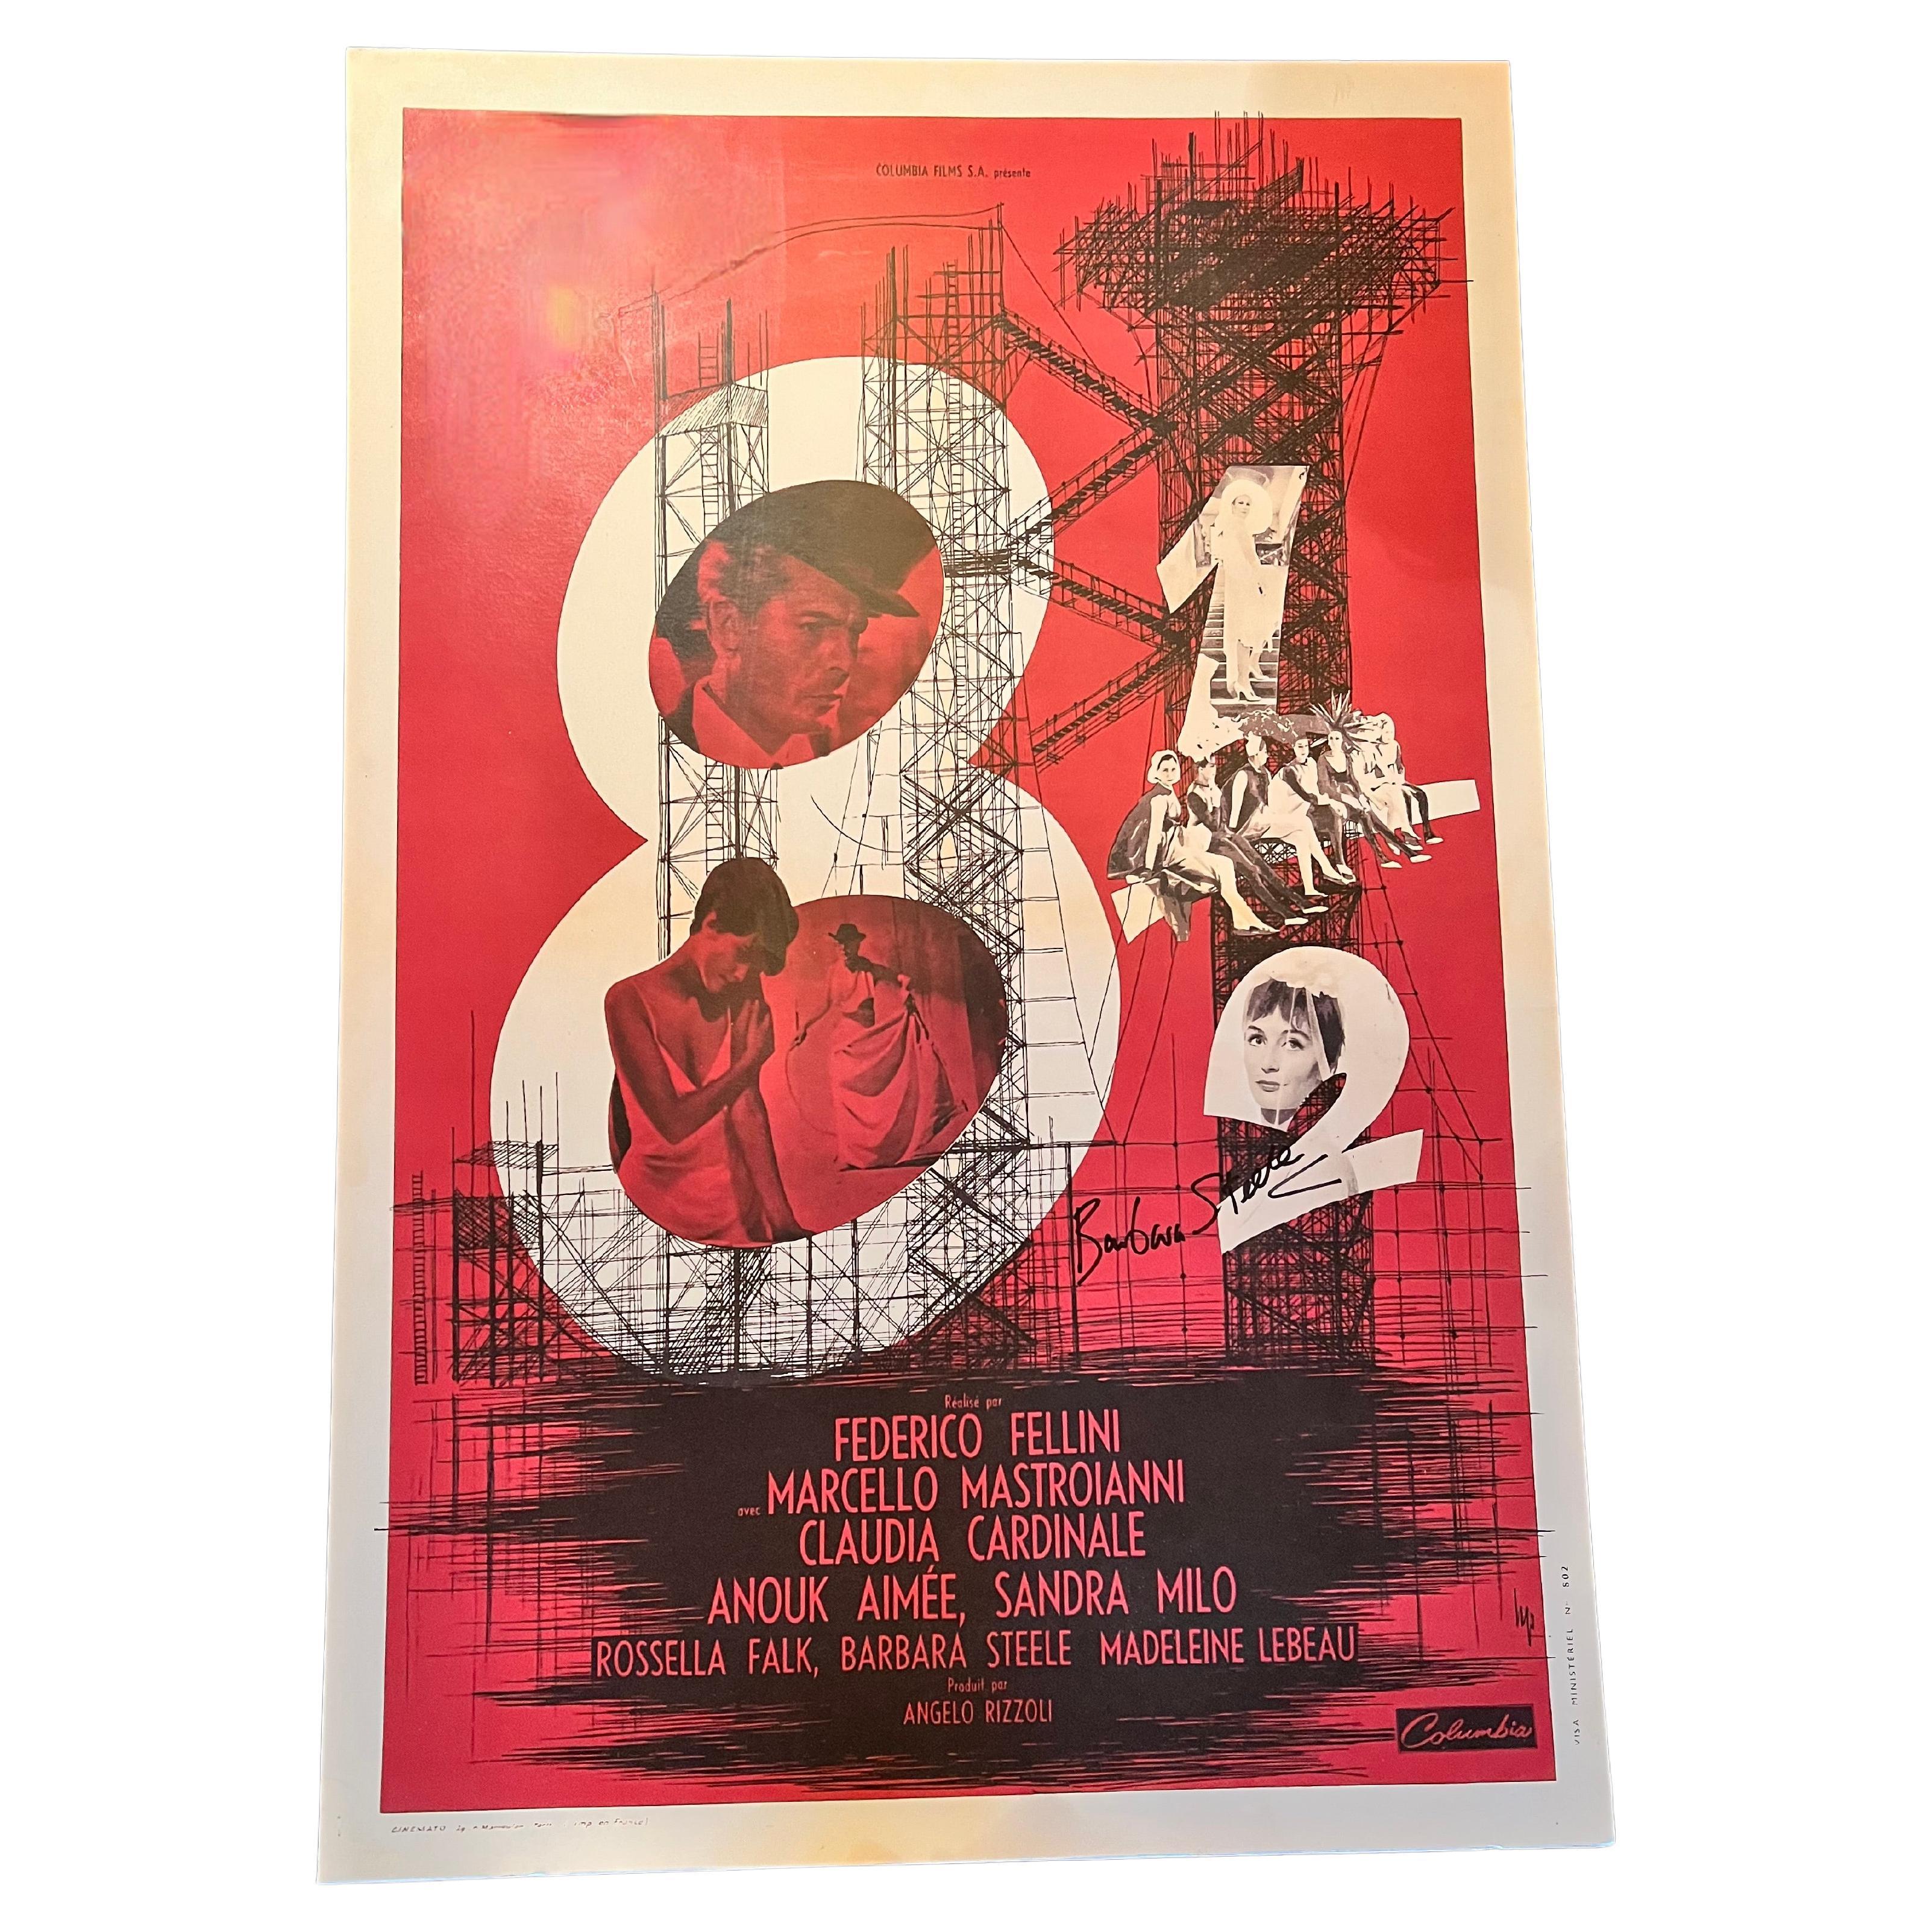 Federico Fellini 8 1/2 movie poster signed by one of the stars and cast, Barbara Steele. The poster, is a print of one of the original posters from the 1963 film. the poster is not orignina. The poster is in good condition and mounted on 1/4